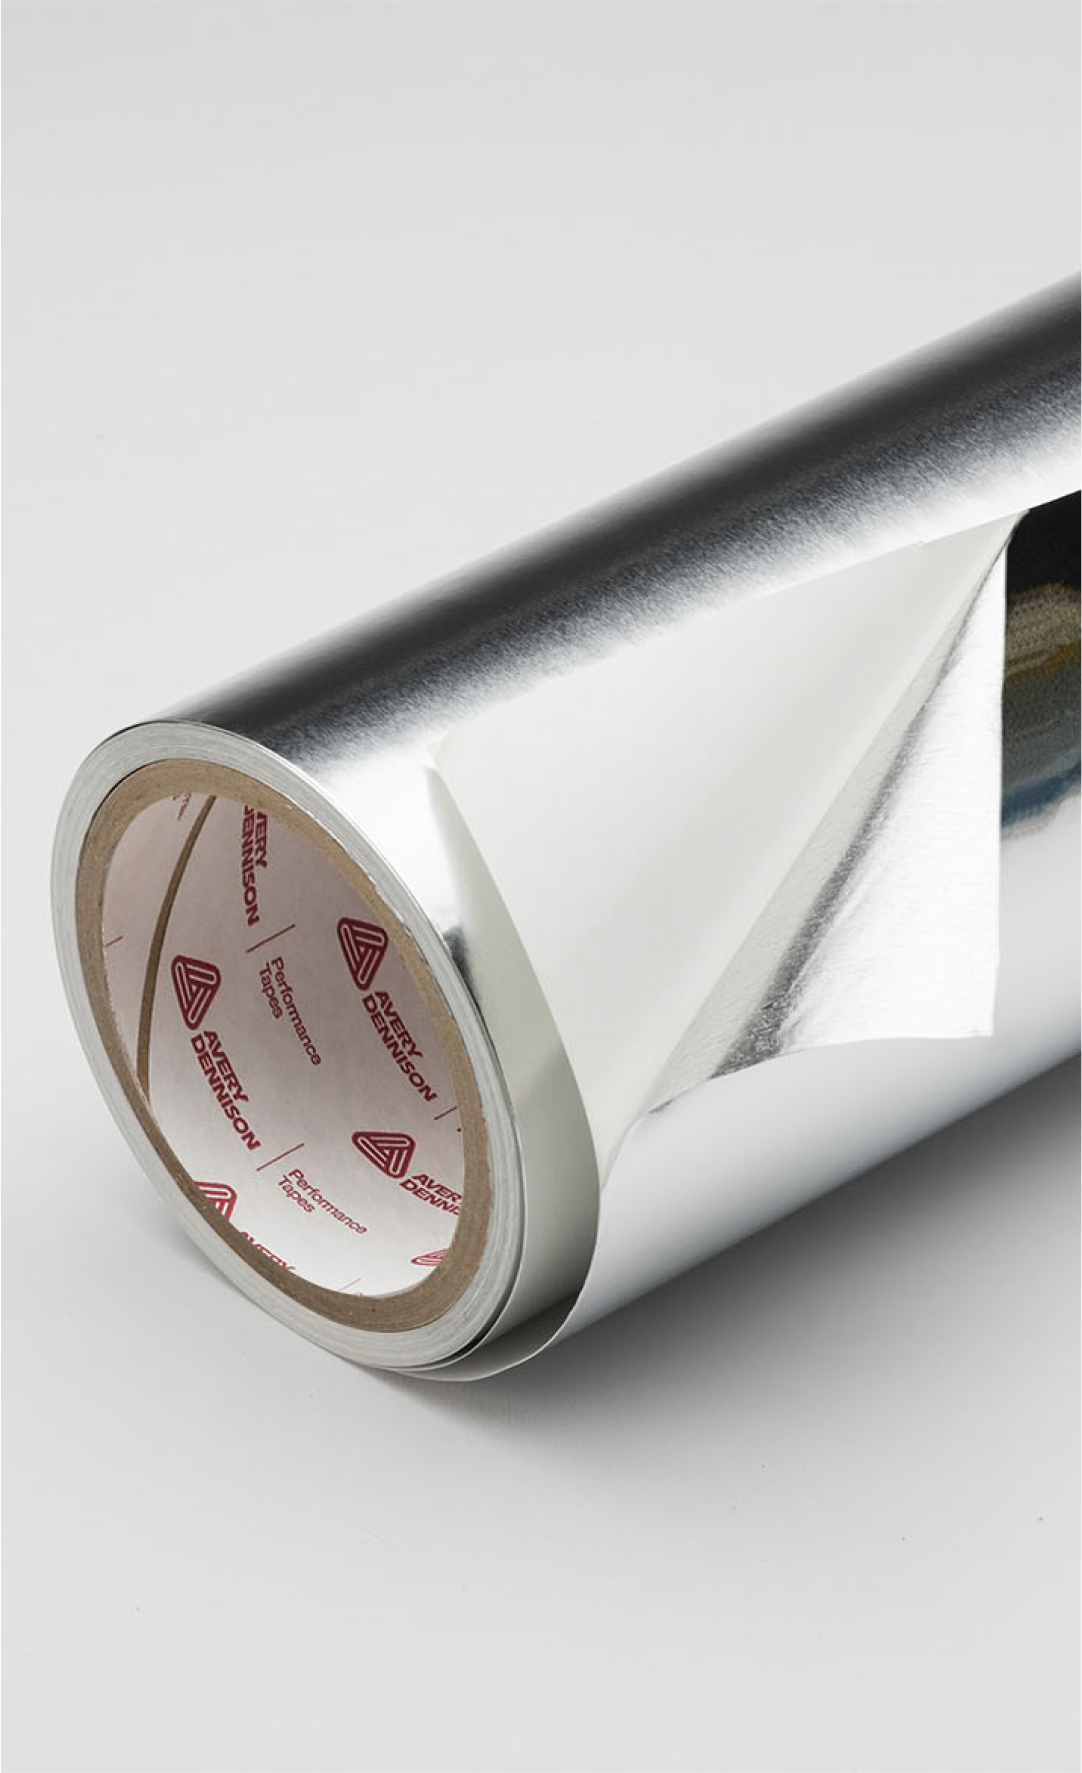 Avery Dennison Cold Tough Adhesive Tapes 